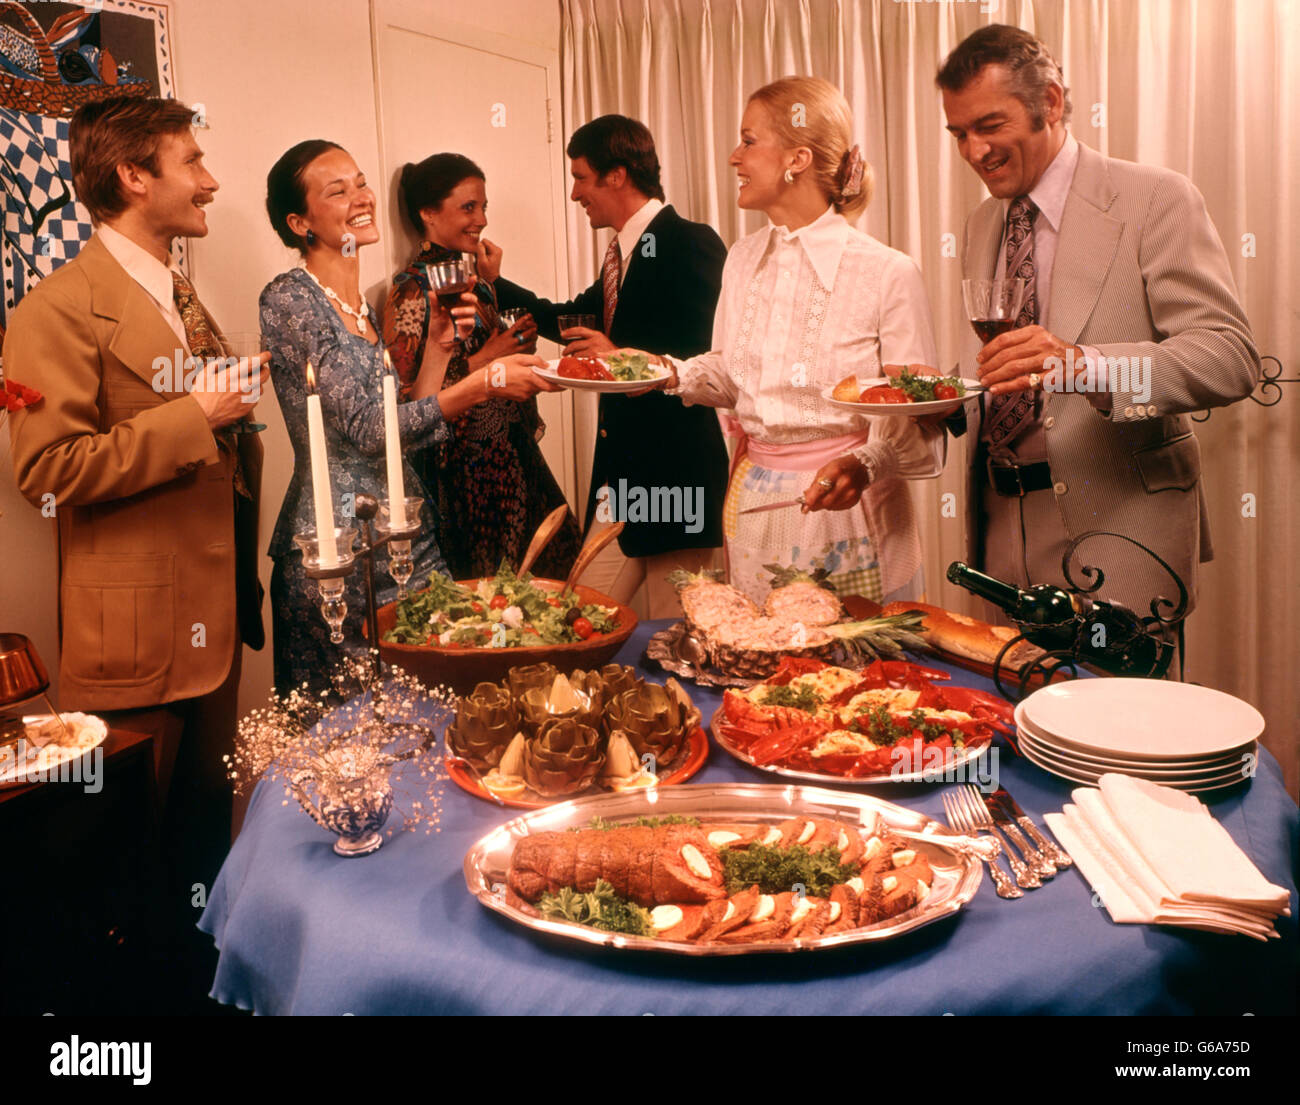 1970s MEN WOMEN COCKTAIL DINNER PARTY BUFFET WOMAN HOSTESS SERVING FOOD DRINKING WINE Stock Photo